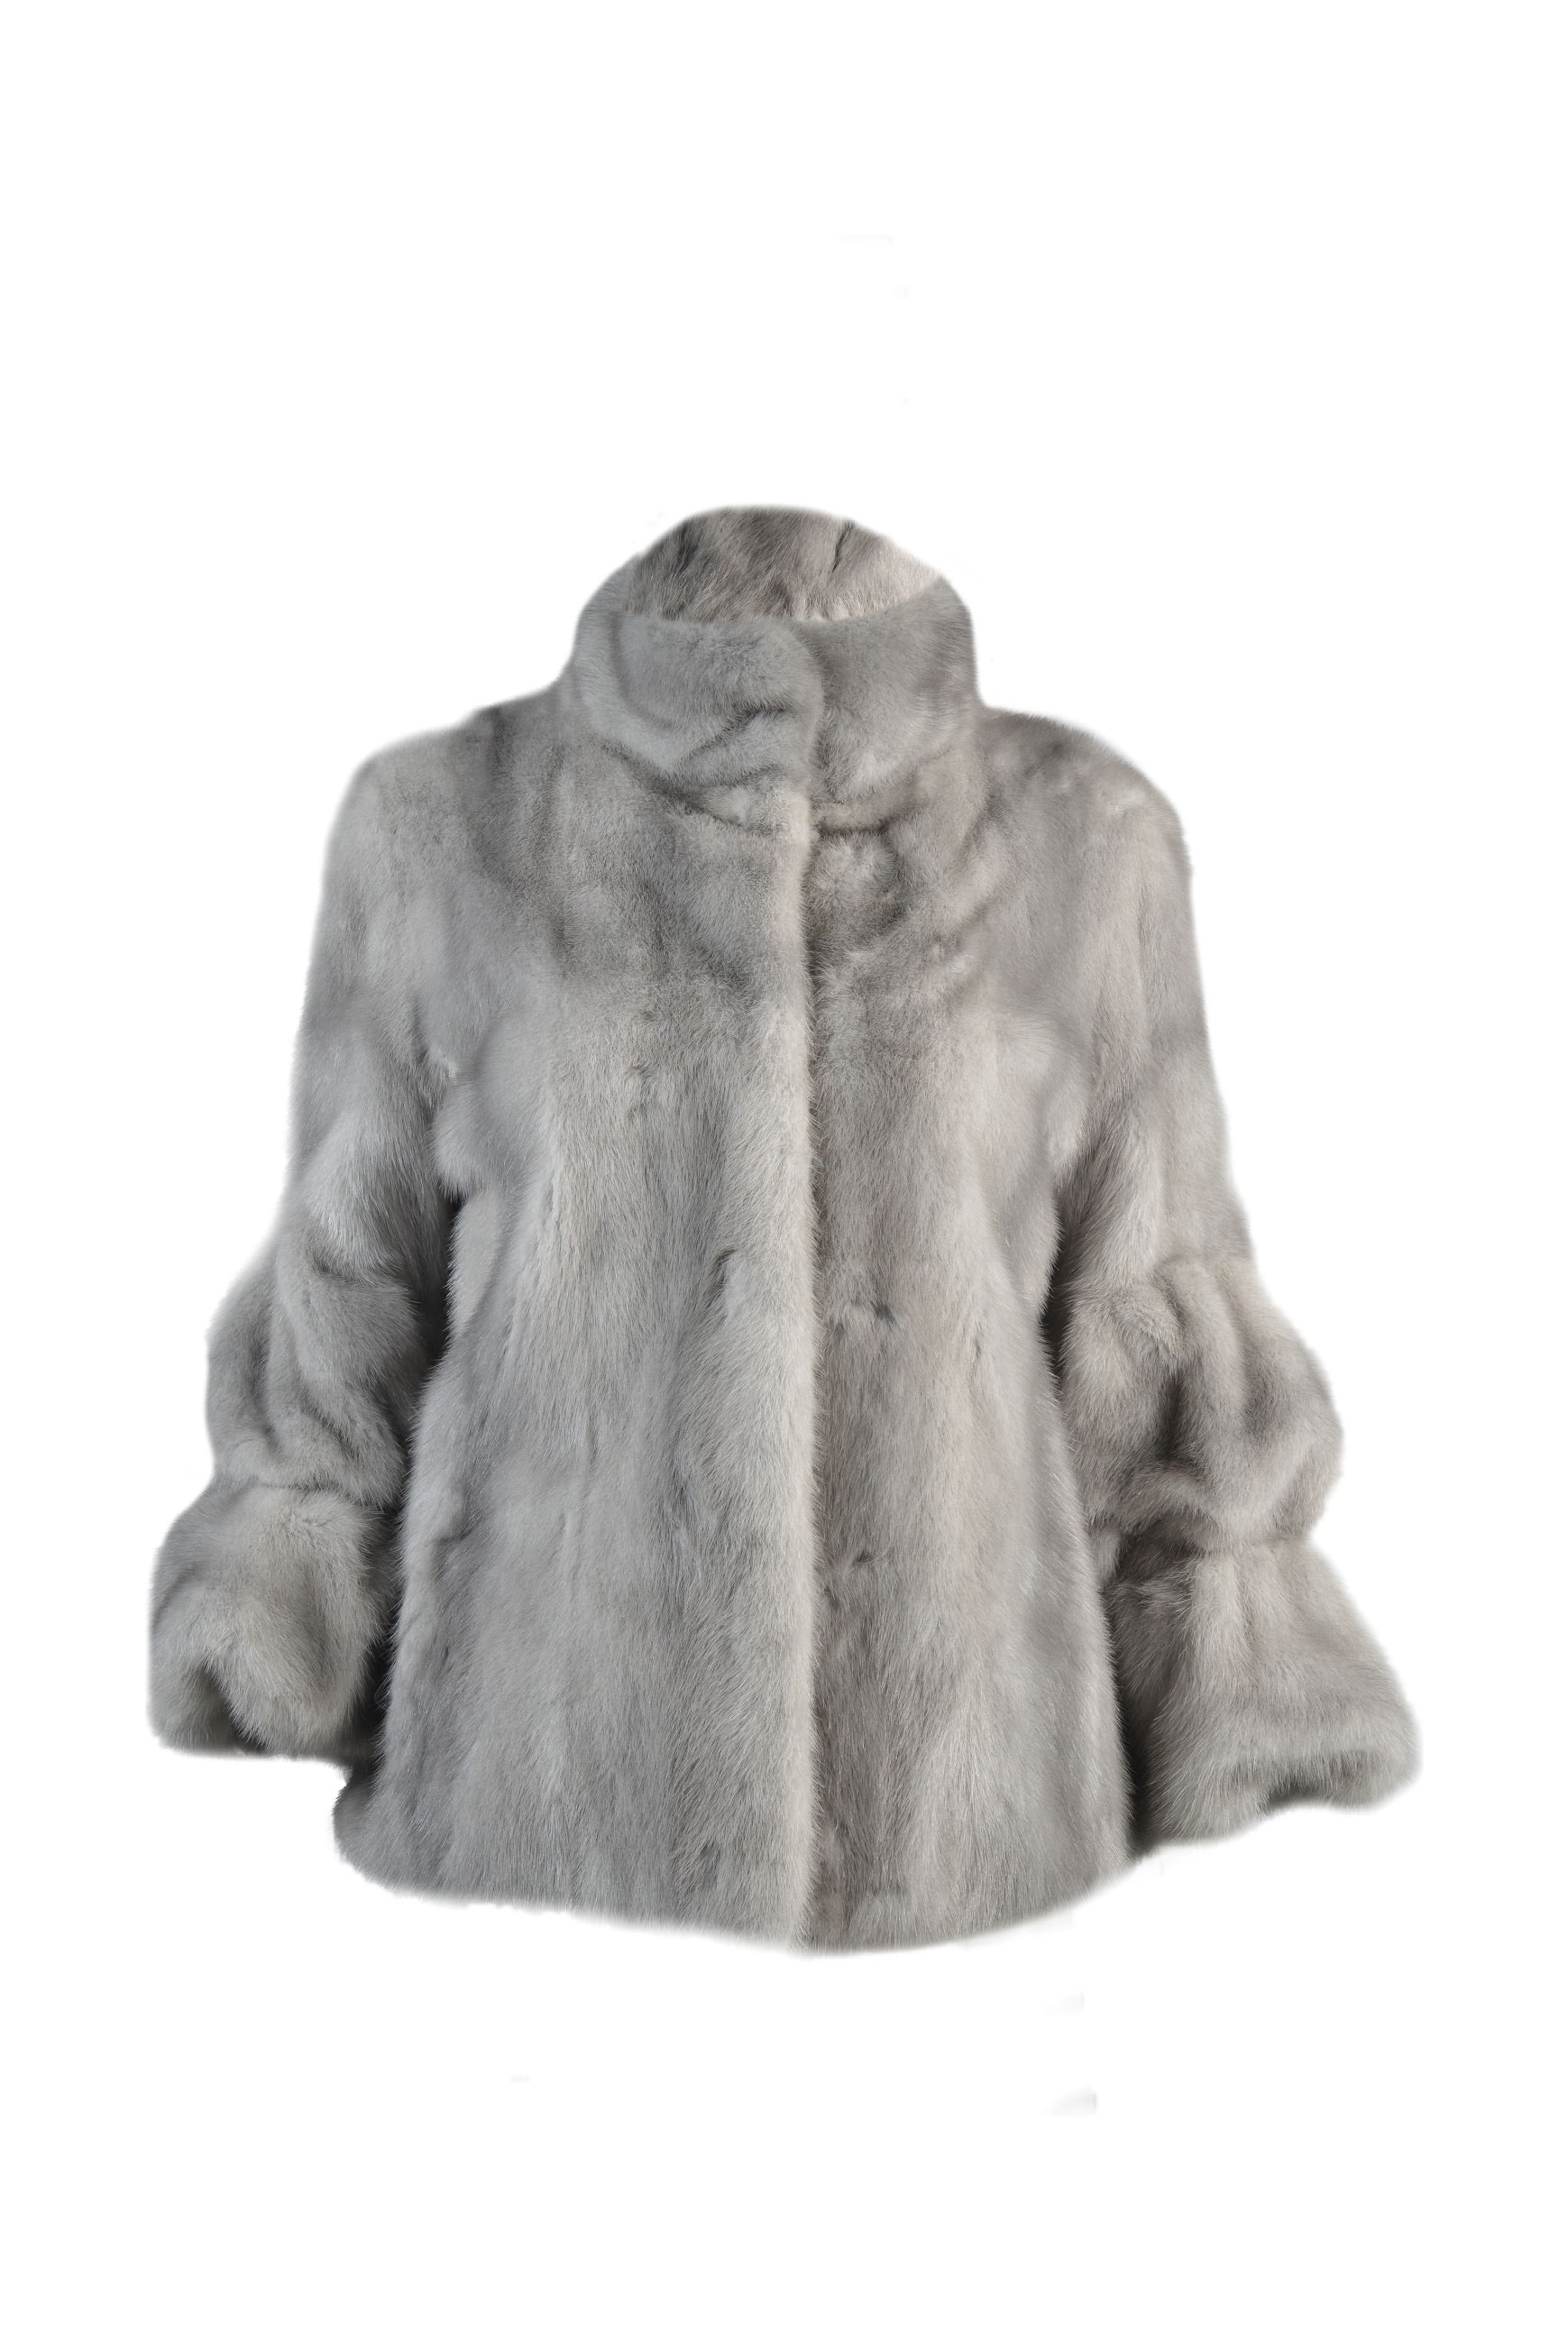 Sapphire Mink Jacket – The Fur And Leather Centre